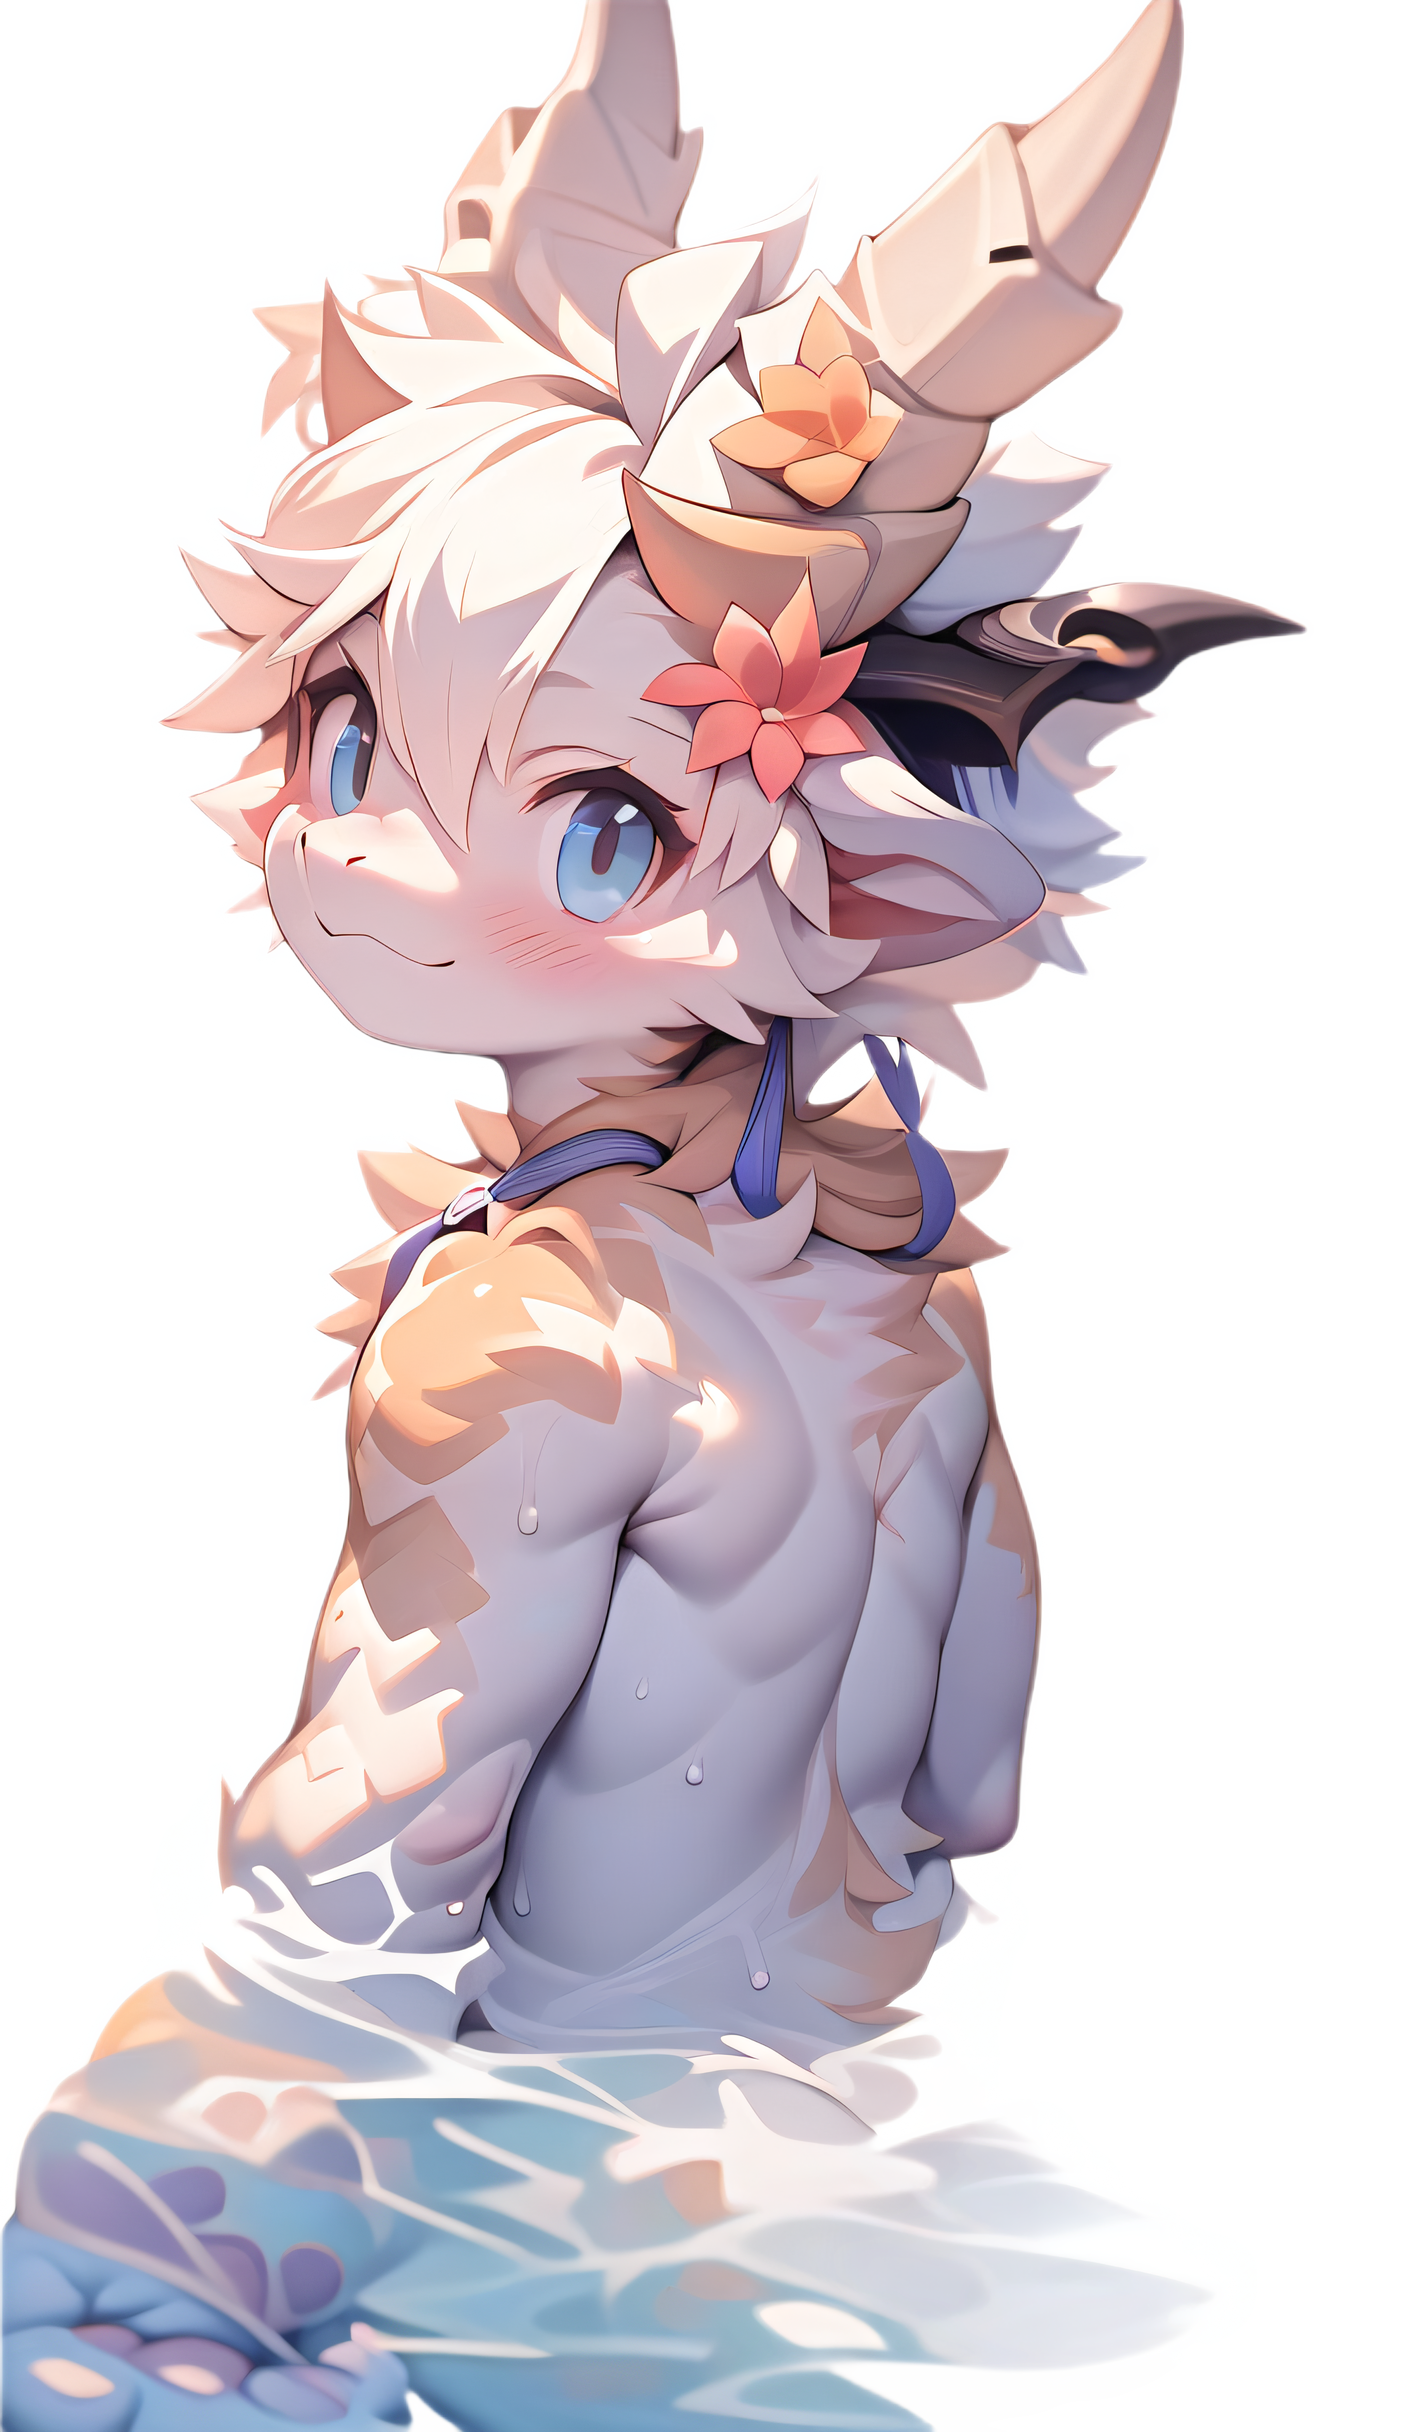 Furry,Male,Humanoid,Size Difference,Cute,Submissive,OC,My SNS: https://misskey.io/@toynya
This character image I used AI image generation model to generate the image, if you are interested, I posted a lot of furry shota images on my Misskey, you can follow me!